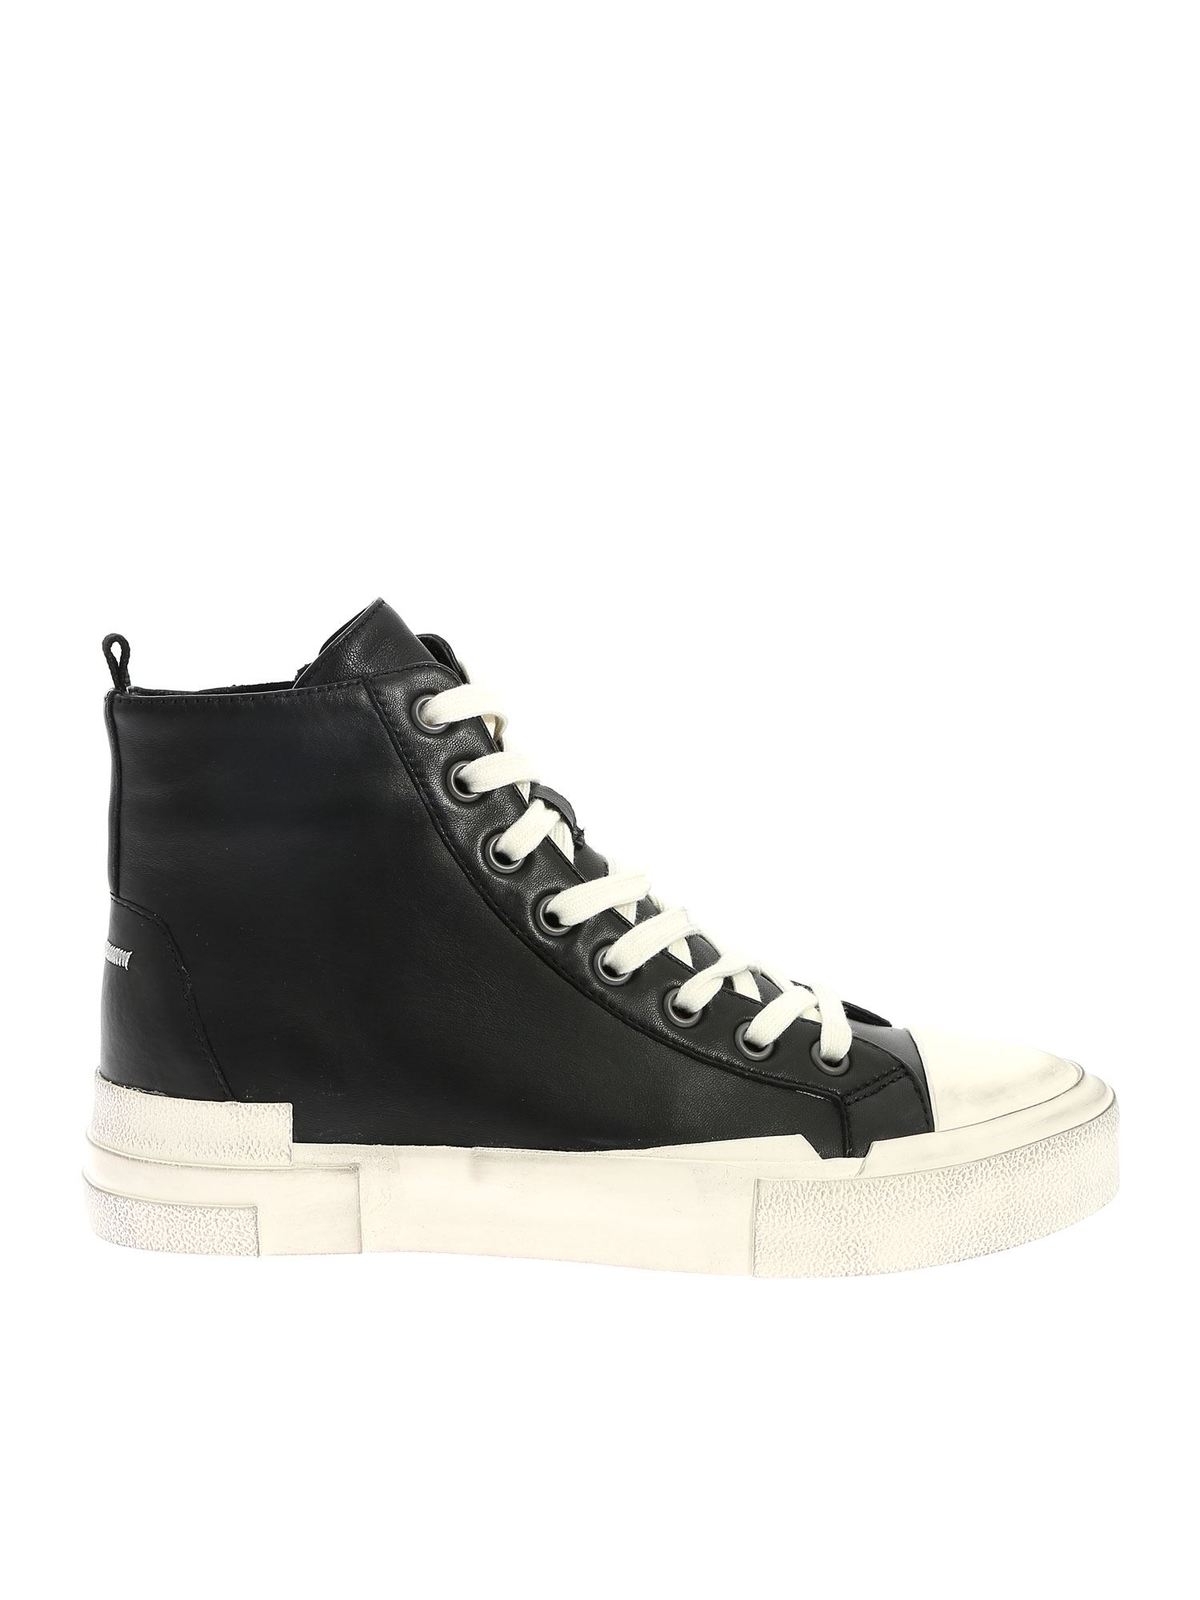 Trainers Ash - Ghibly Bis sneakers in black - GHIBLYBISSS21V134423001